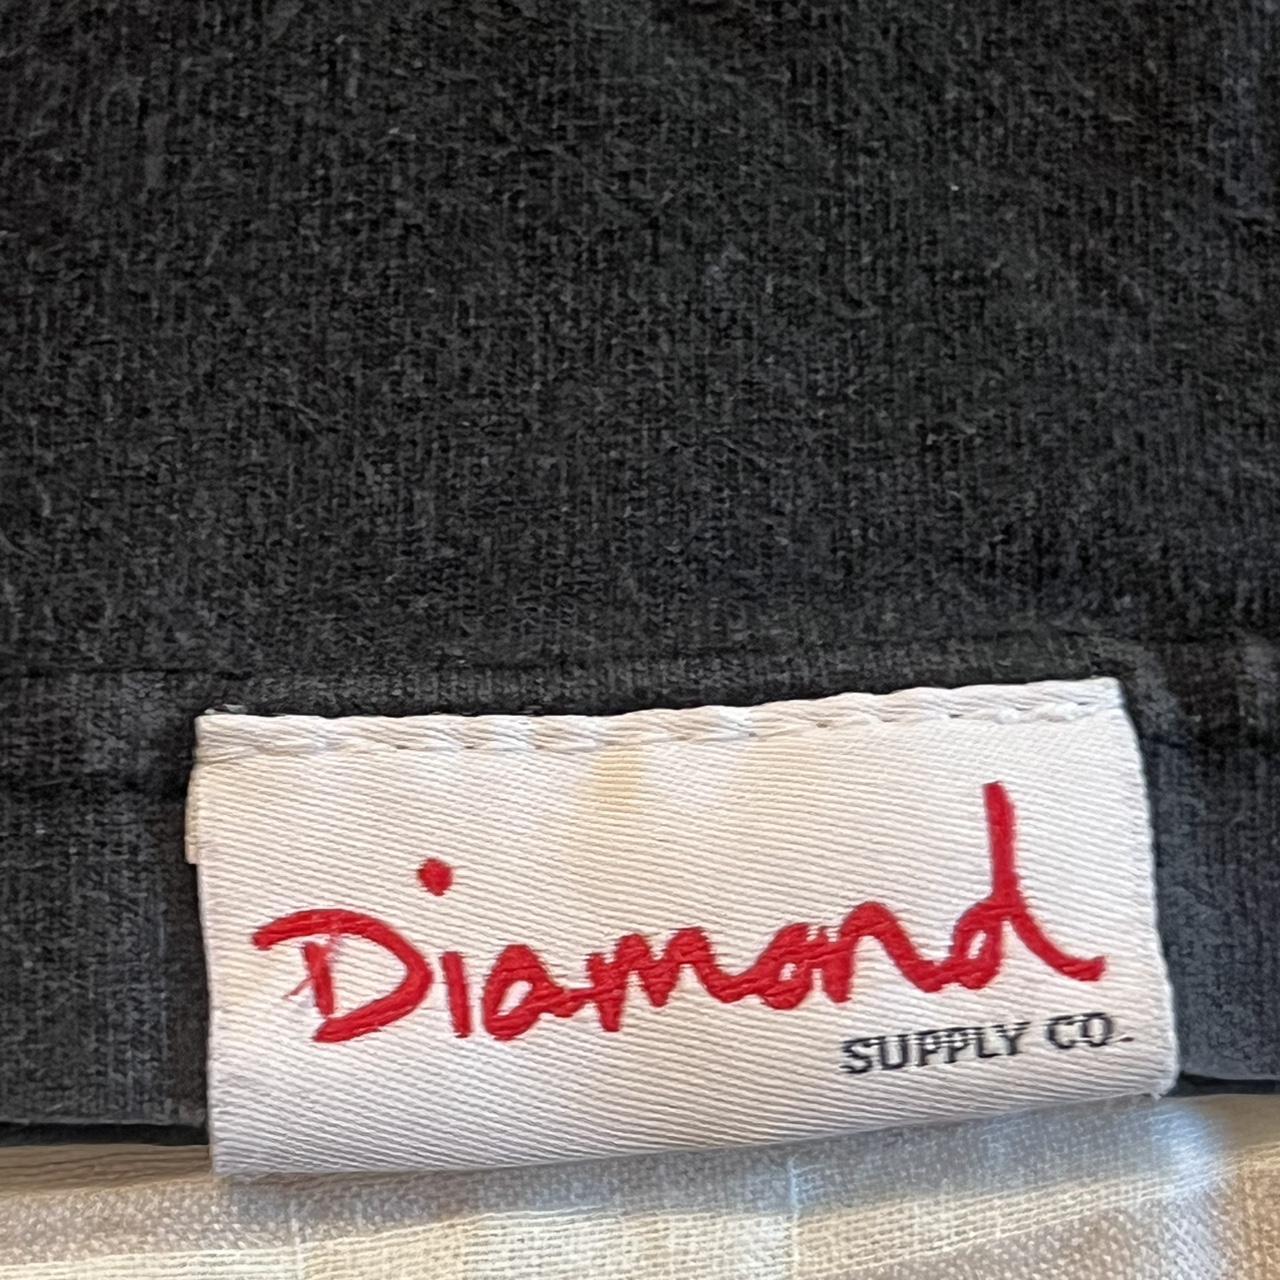 Diamond Supply Co. Just Dropped Official 2020 World Champions Los